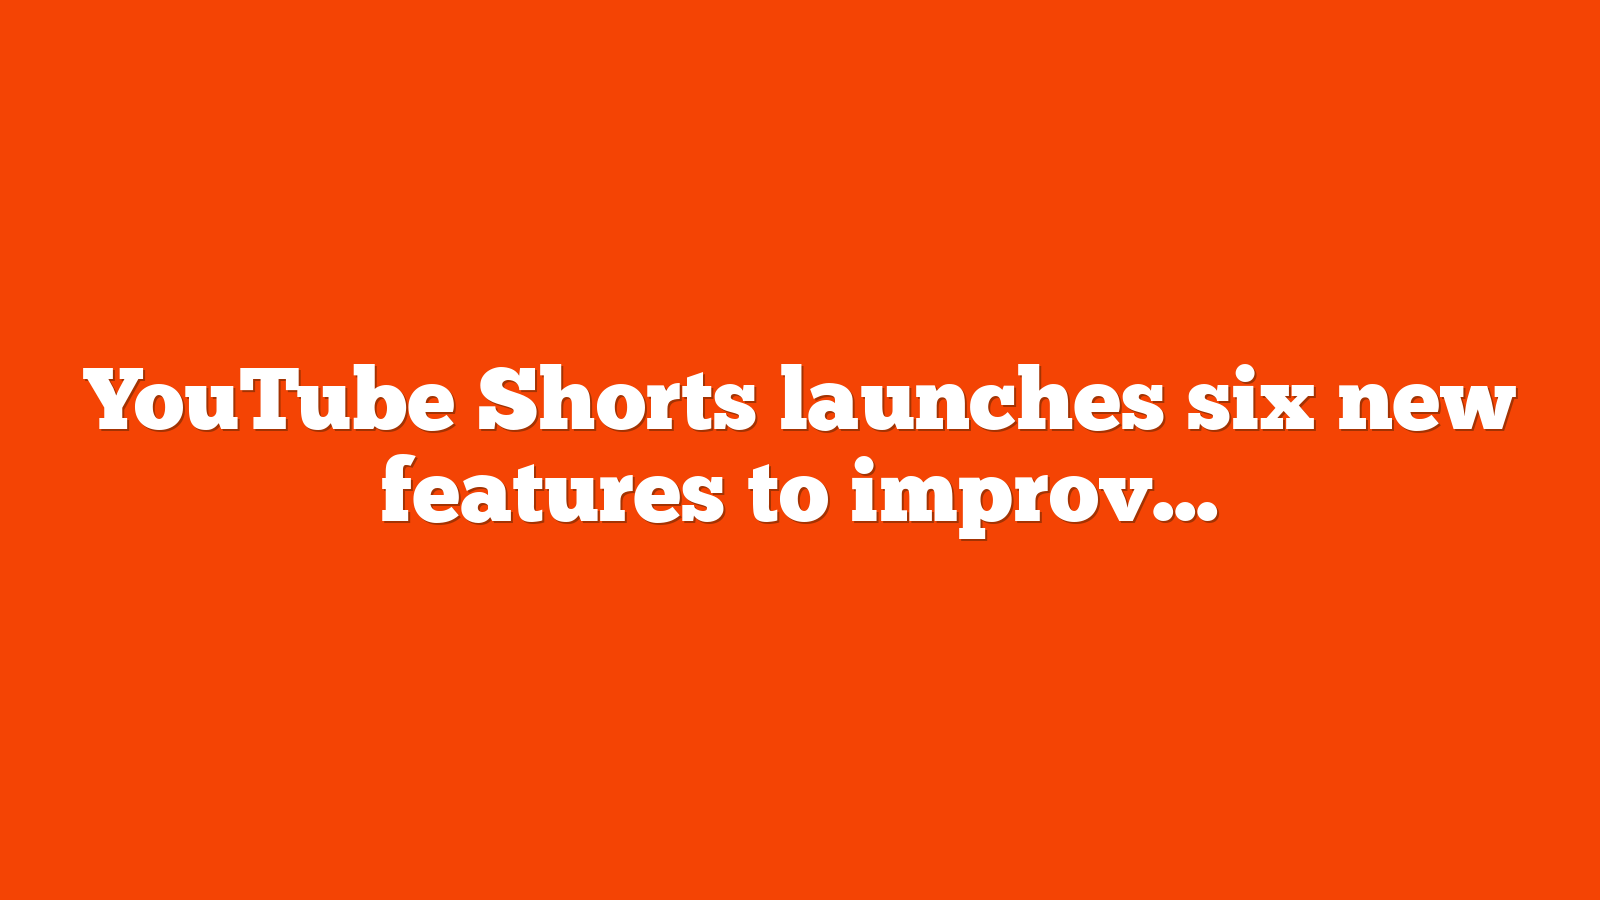 YouTube Shorts launches six new features to improve content creation